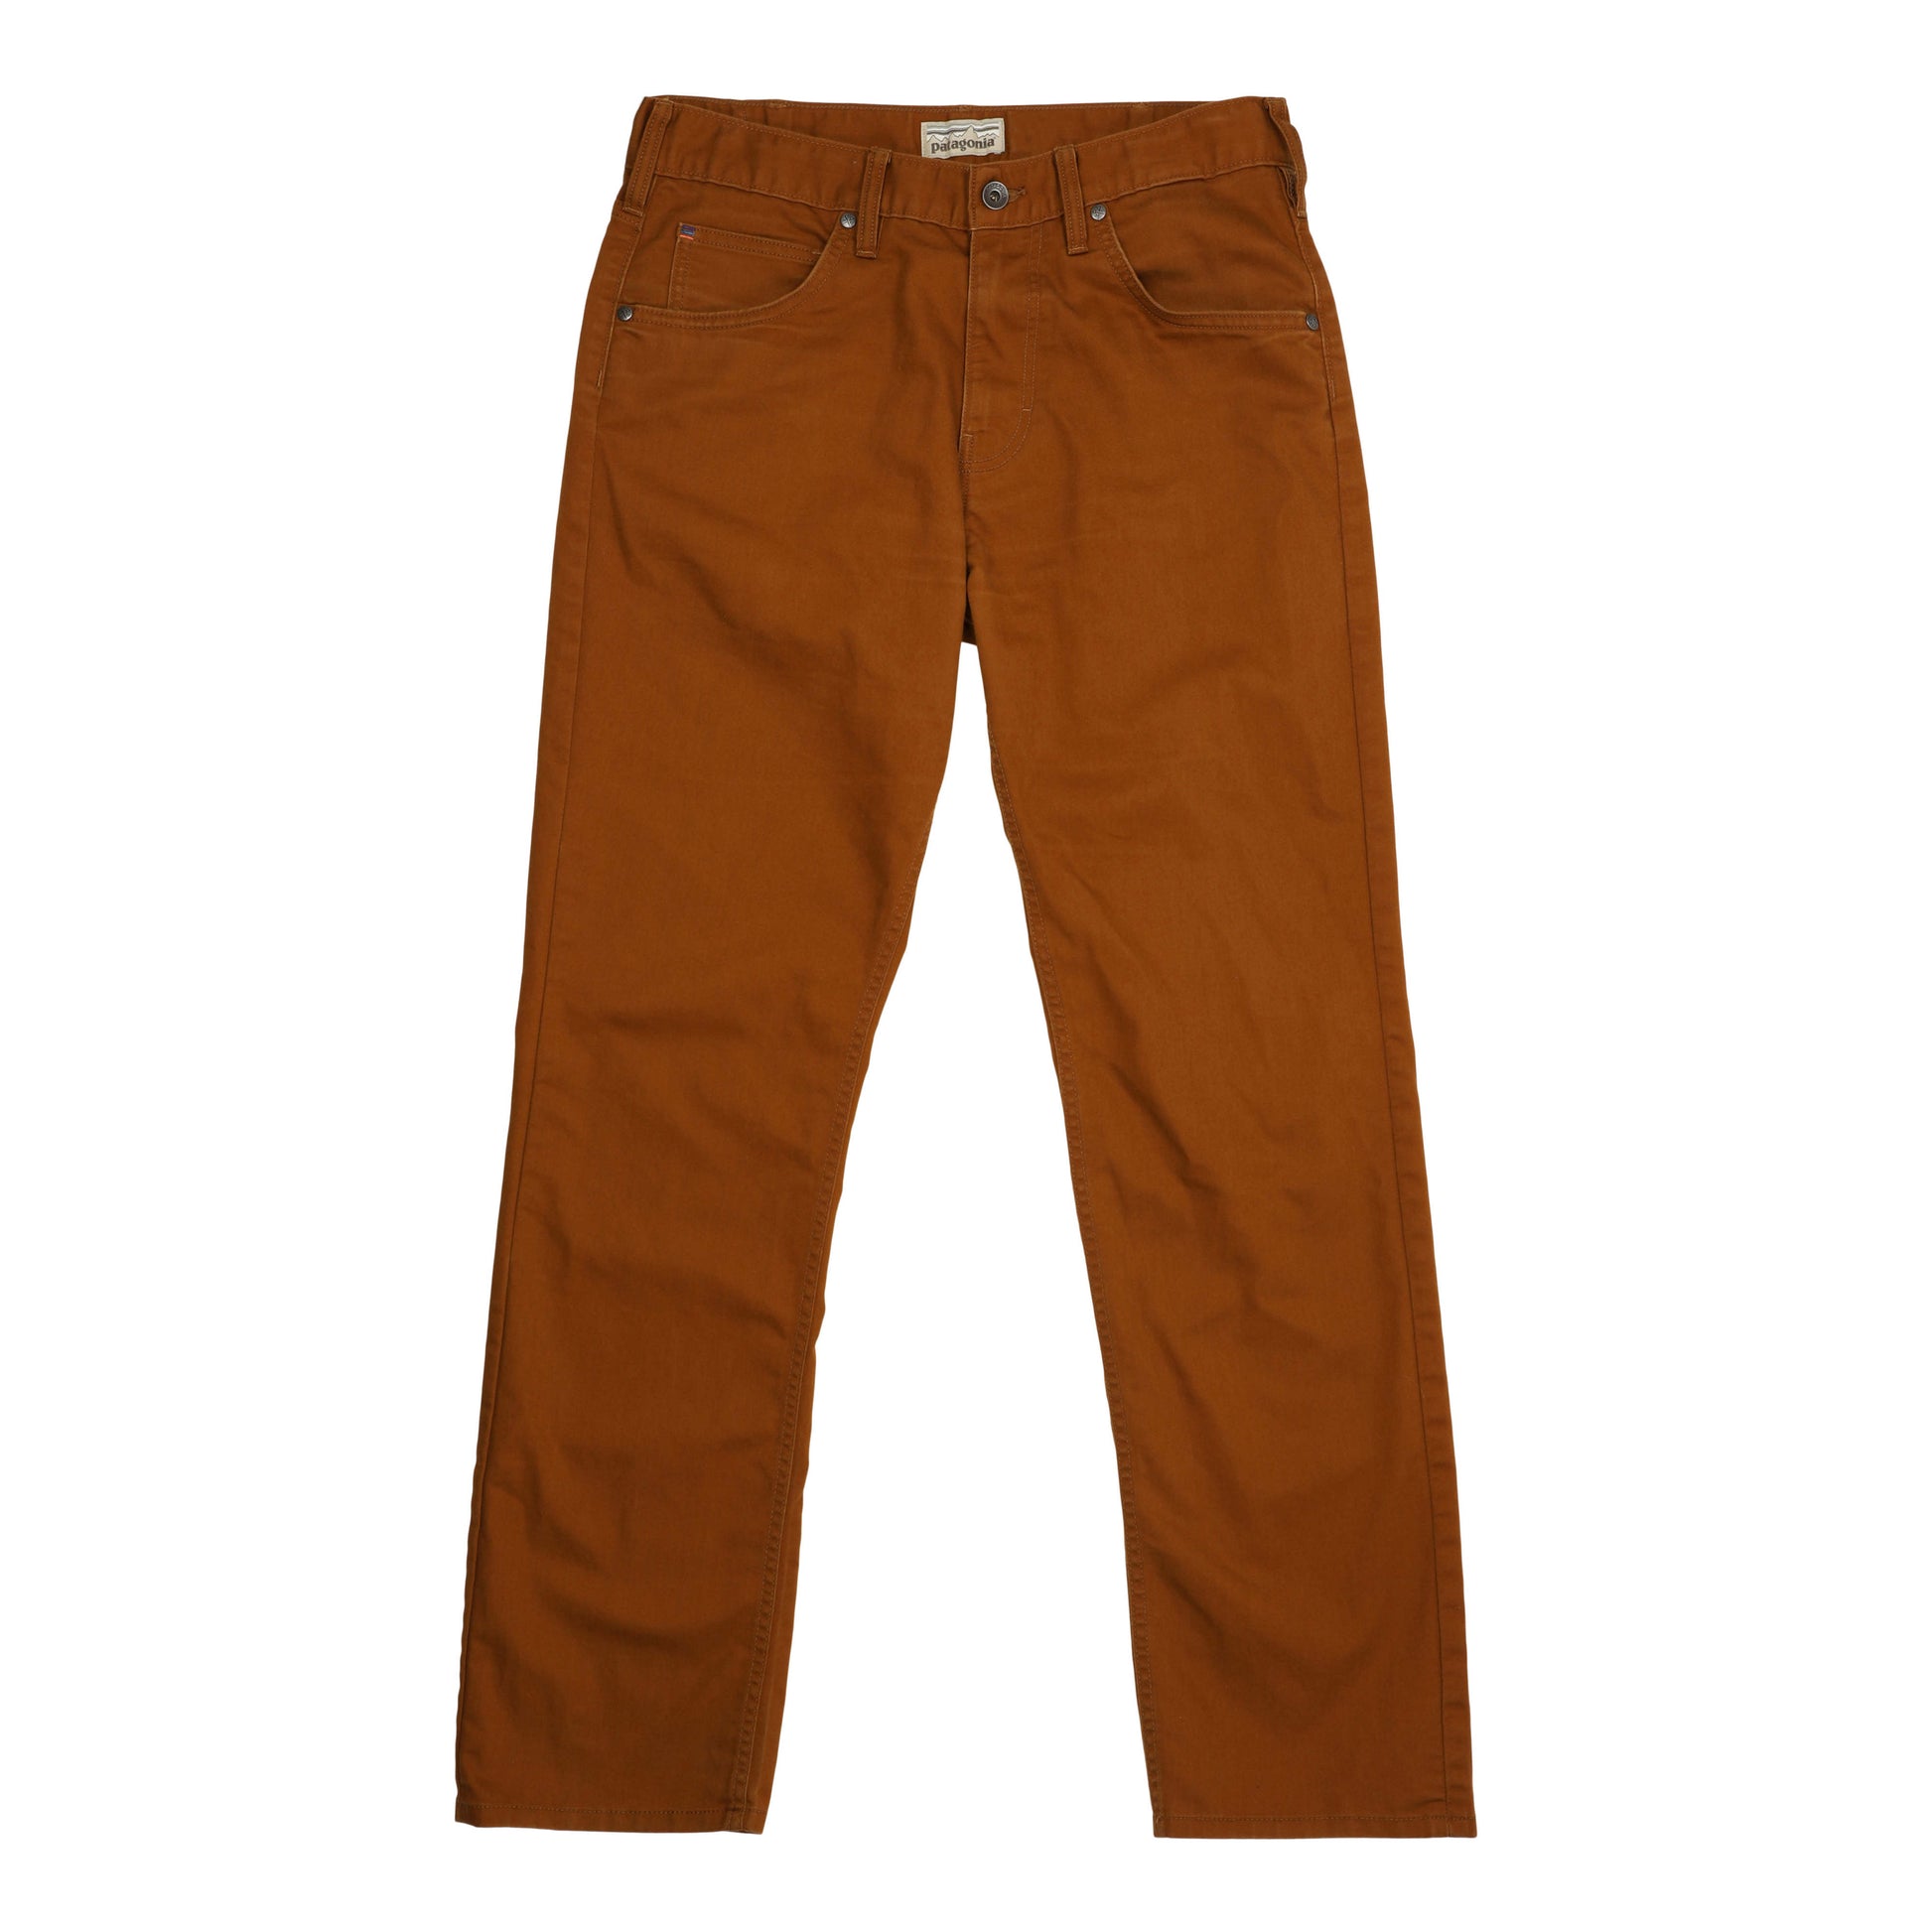 Patagonia Performance Twill Jeans - Men's